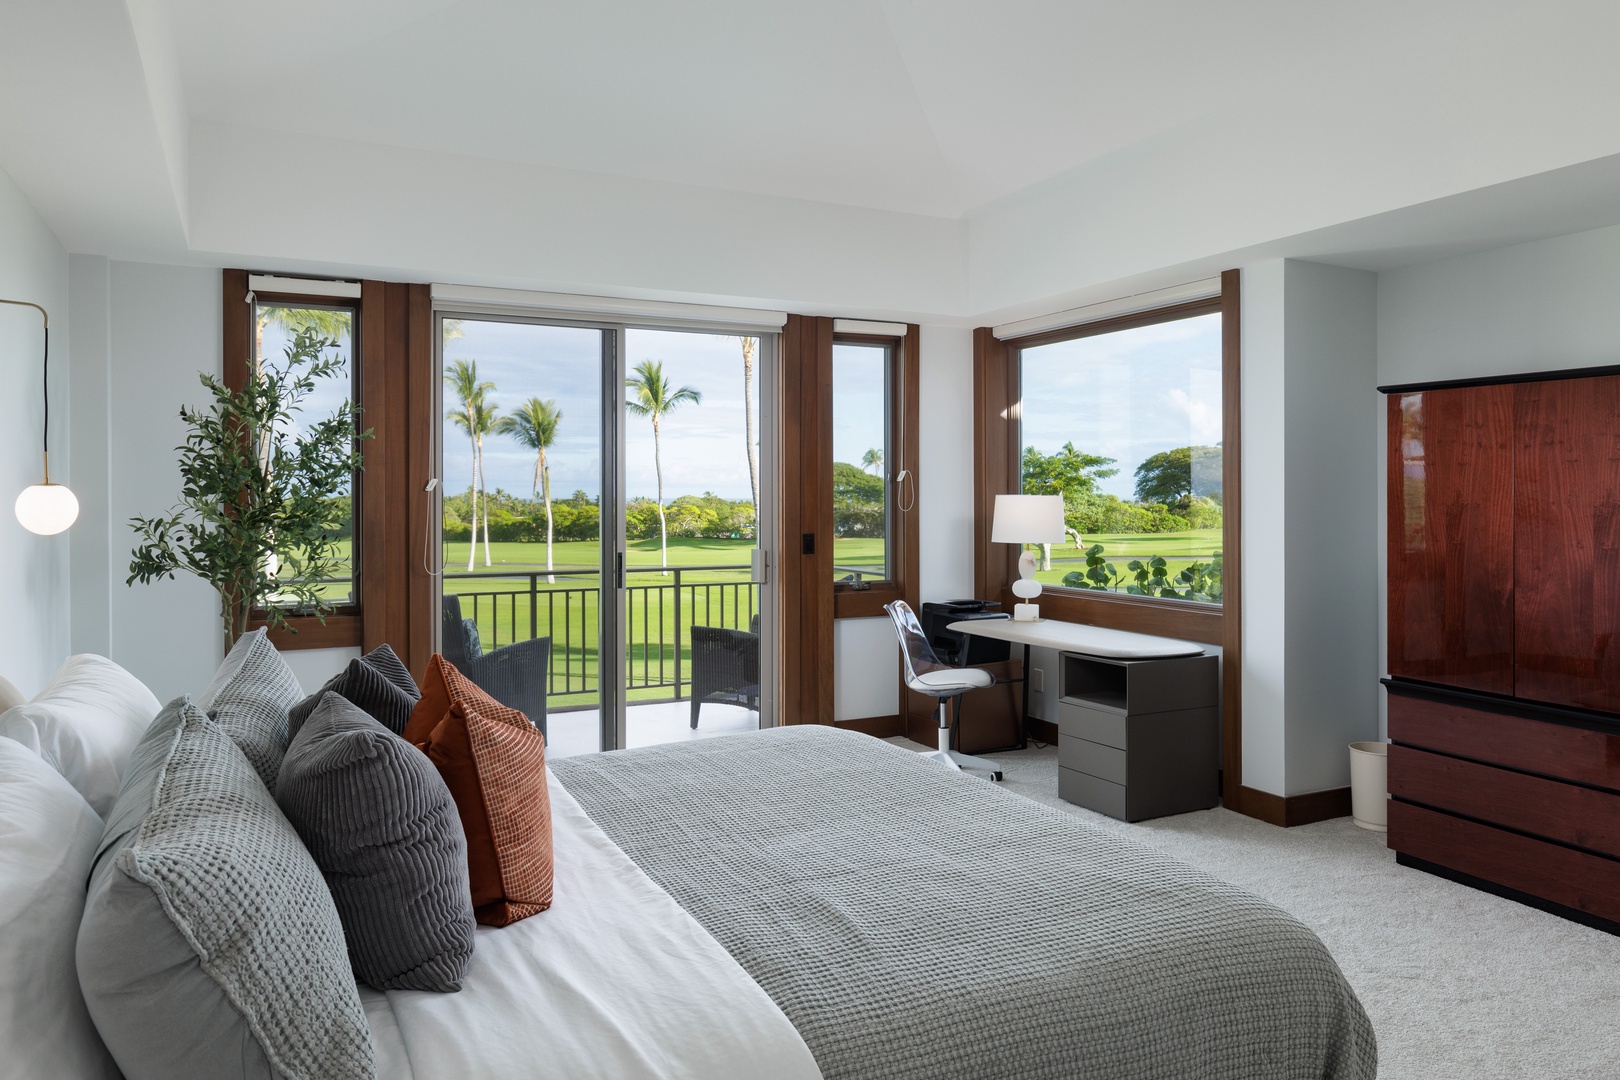 Kailua Kona Vacation Rentals, Fairway Villa 104A - The primary guest suite with a king bed and a dedicated home office with a front seat view of the outdoors.